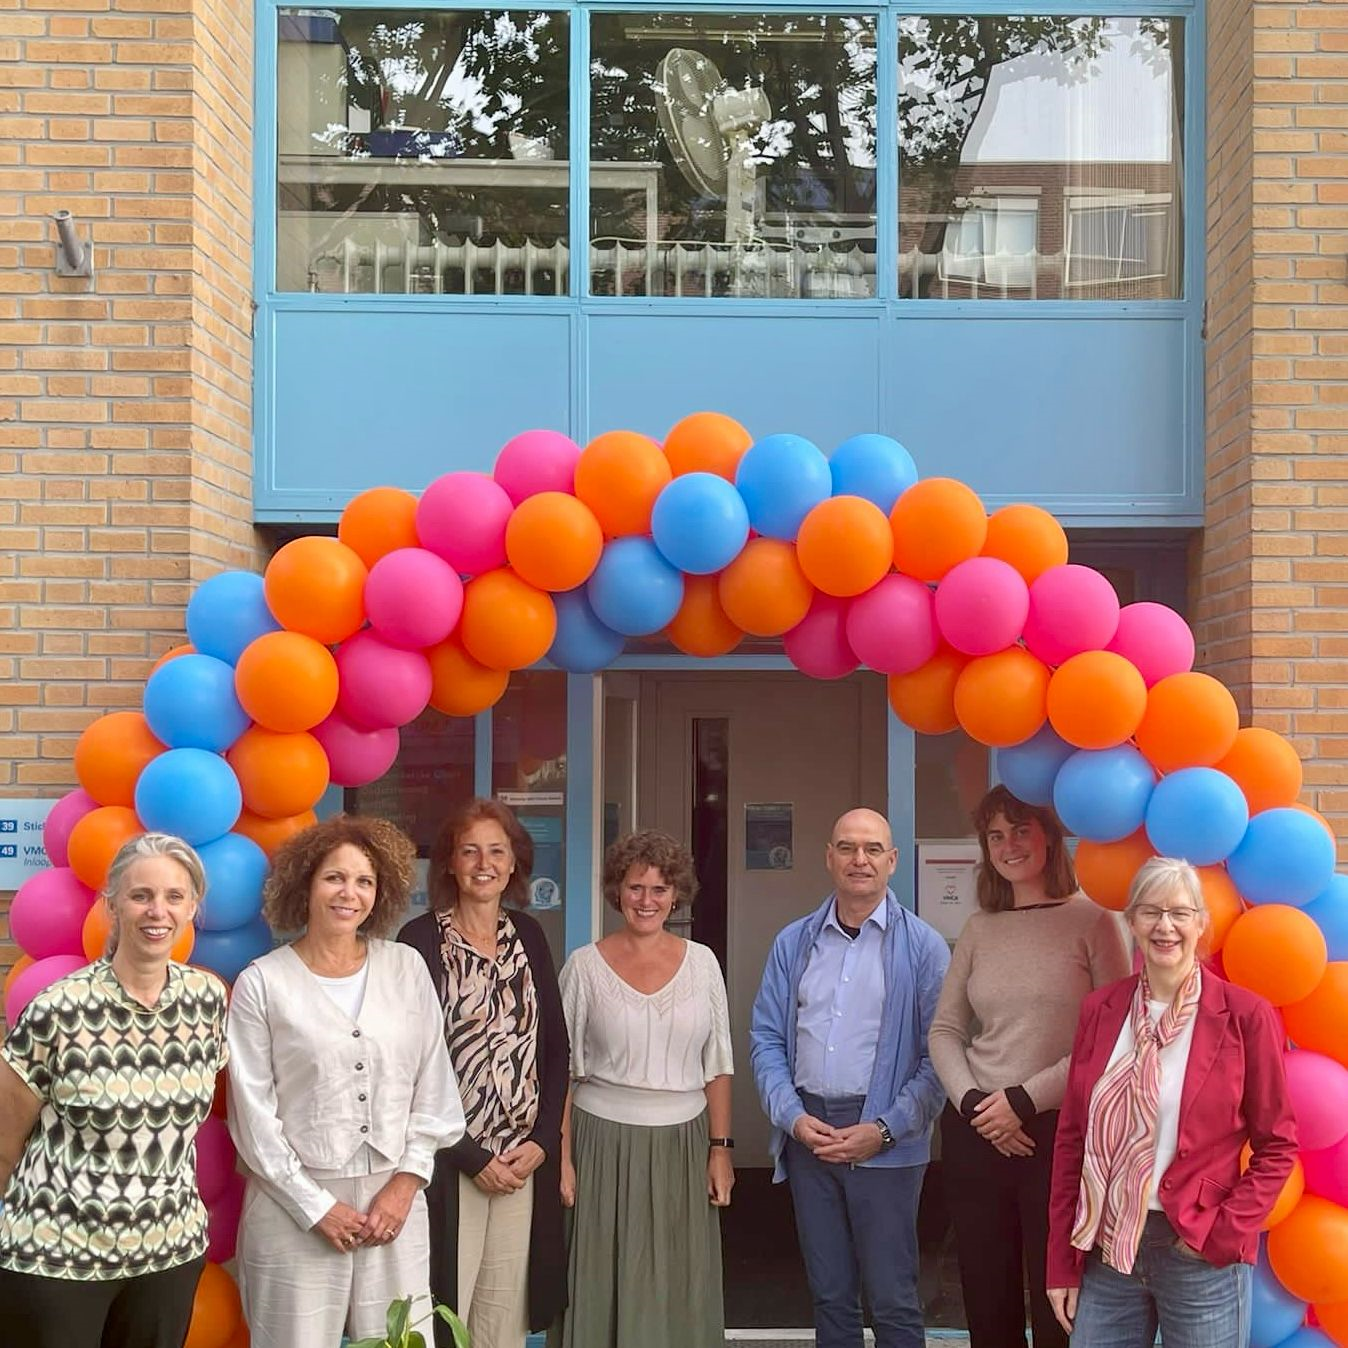 A group of people standing in front of a building with balloons

Description automatically generated